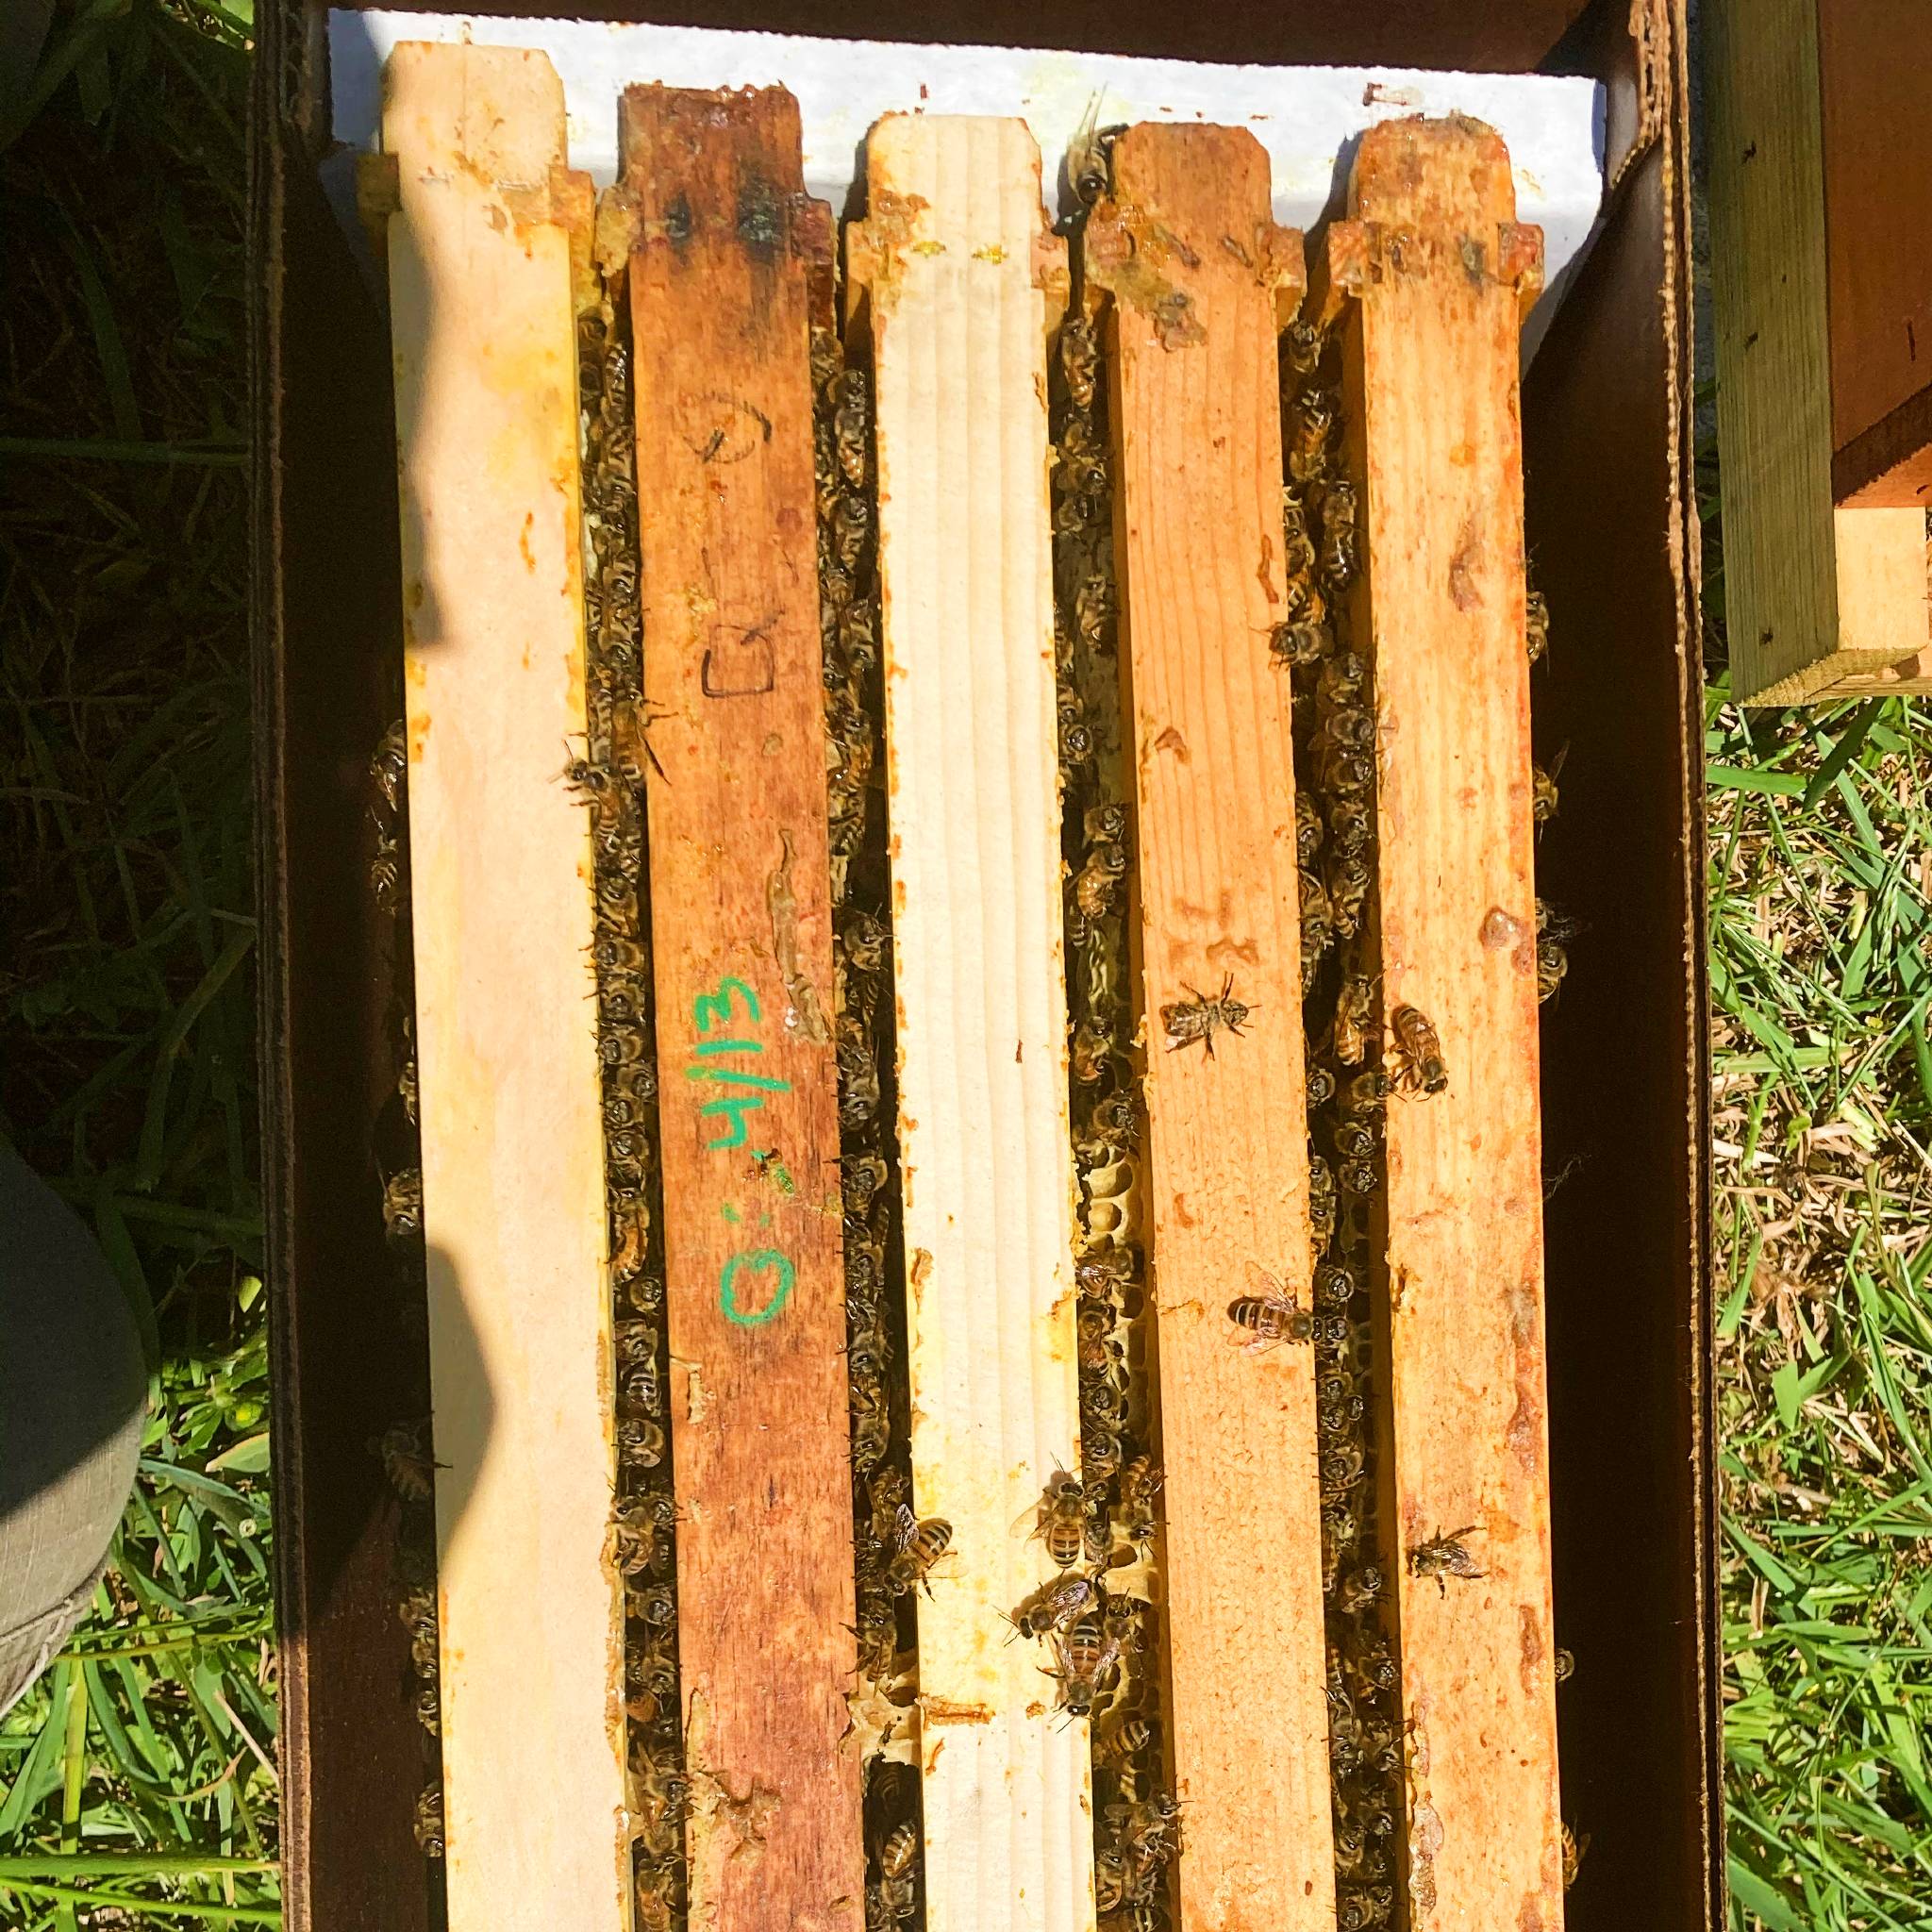 Five frames of bees in a nucleus colony from Mill Creek Apiary